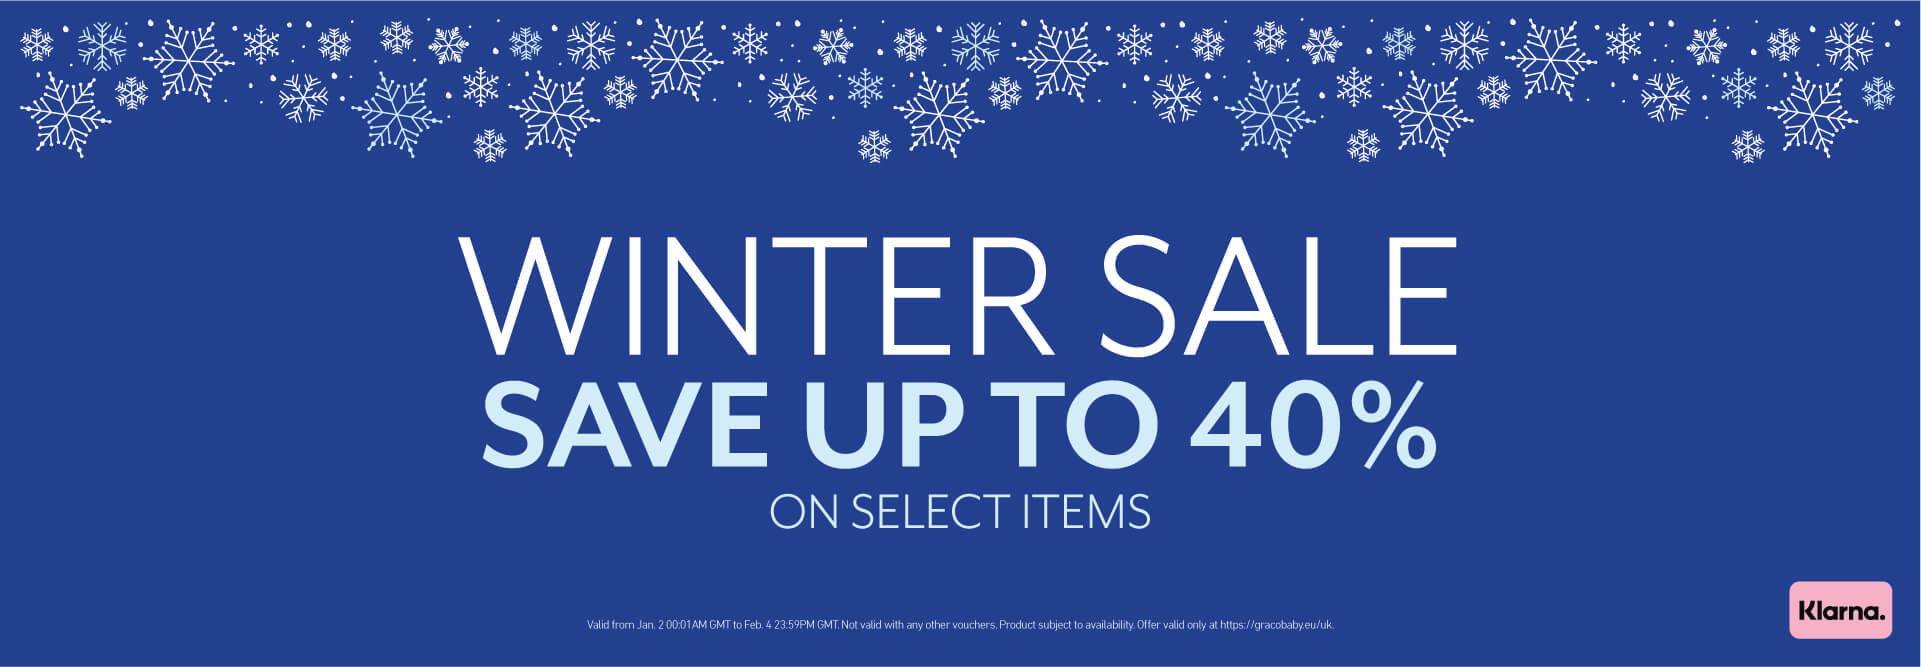 Blue banner with snowflakes and white text reading Winter Sale Save Up To 40% on Select Items.